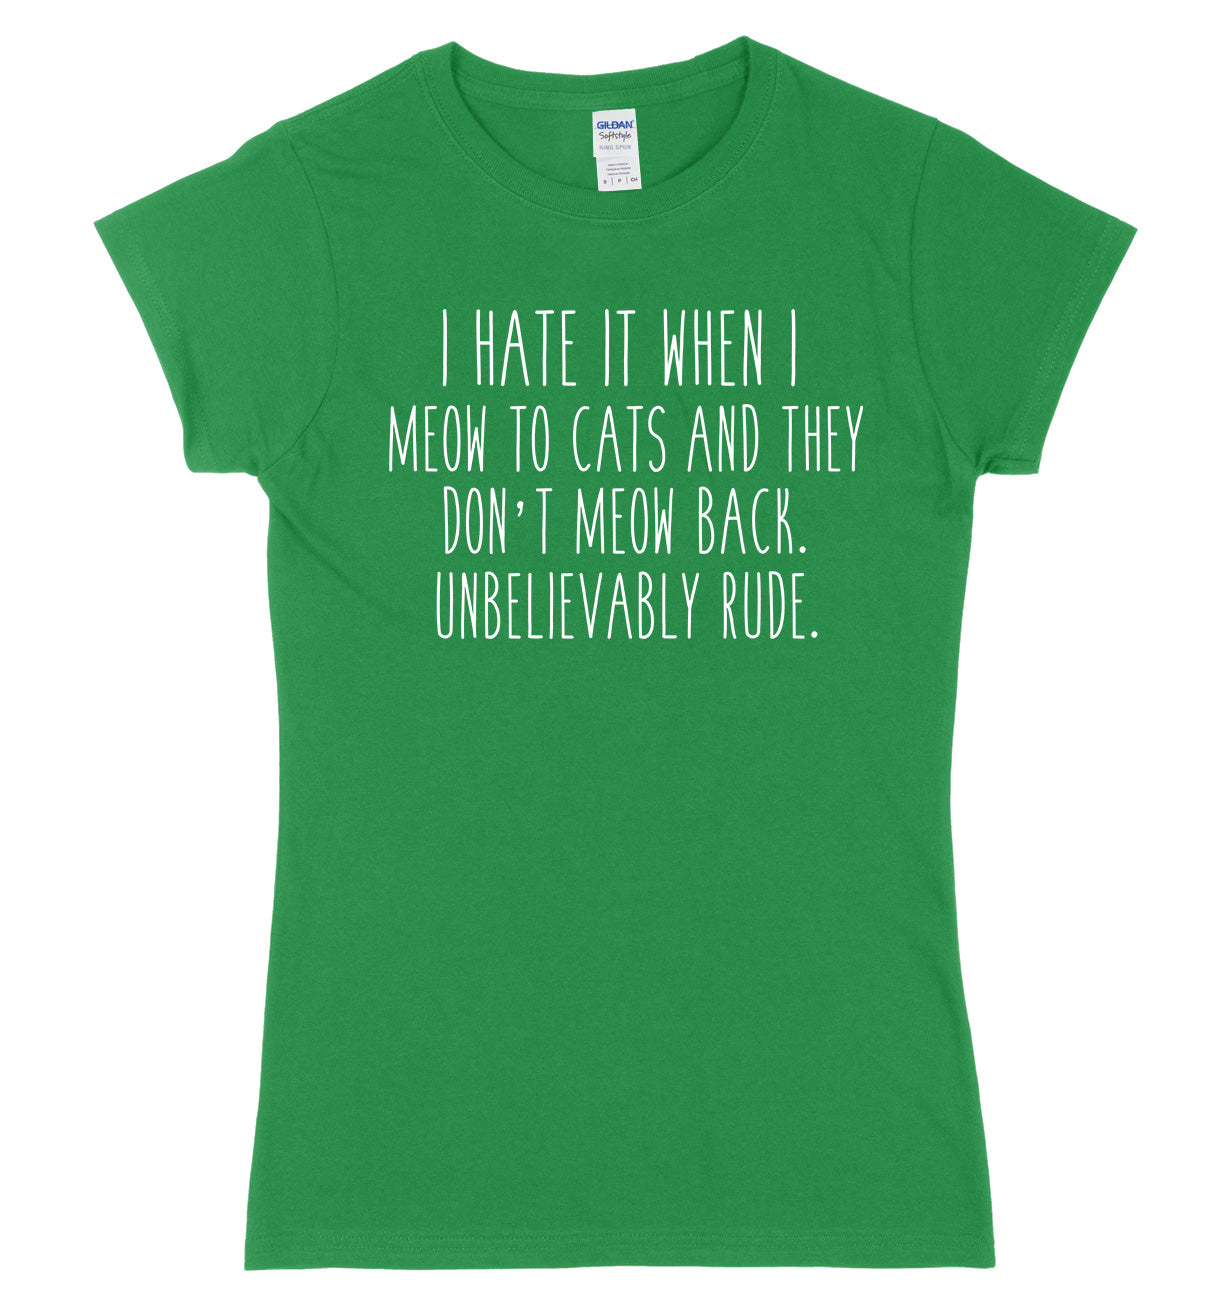 I Hate It When I Meow To Cats And They Don't Meow Back. Unbelievably Rude Womens Ladies Slim Fit T-Shirt